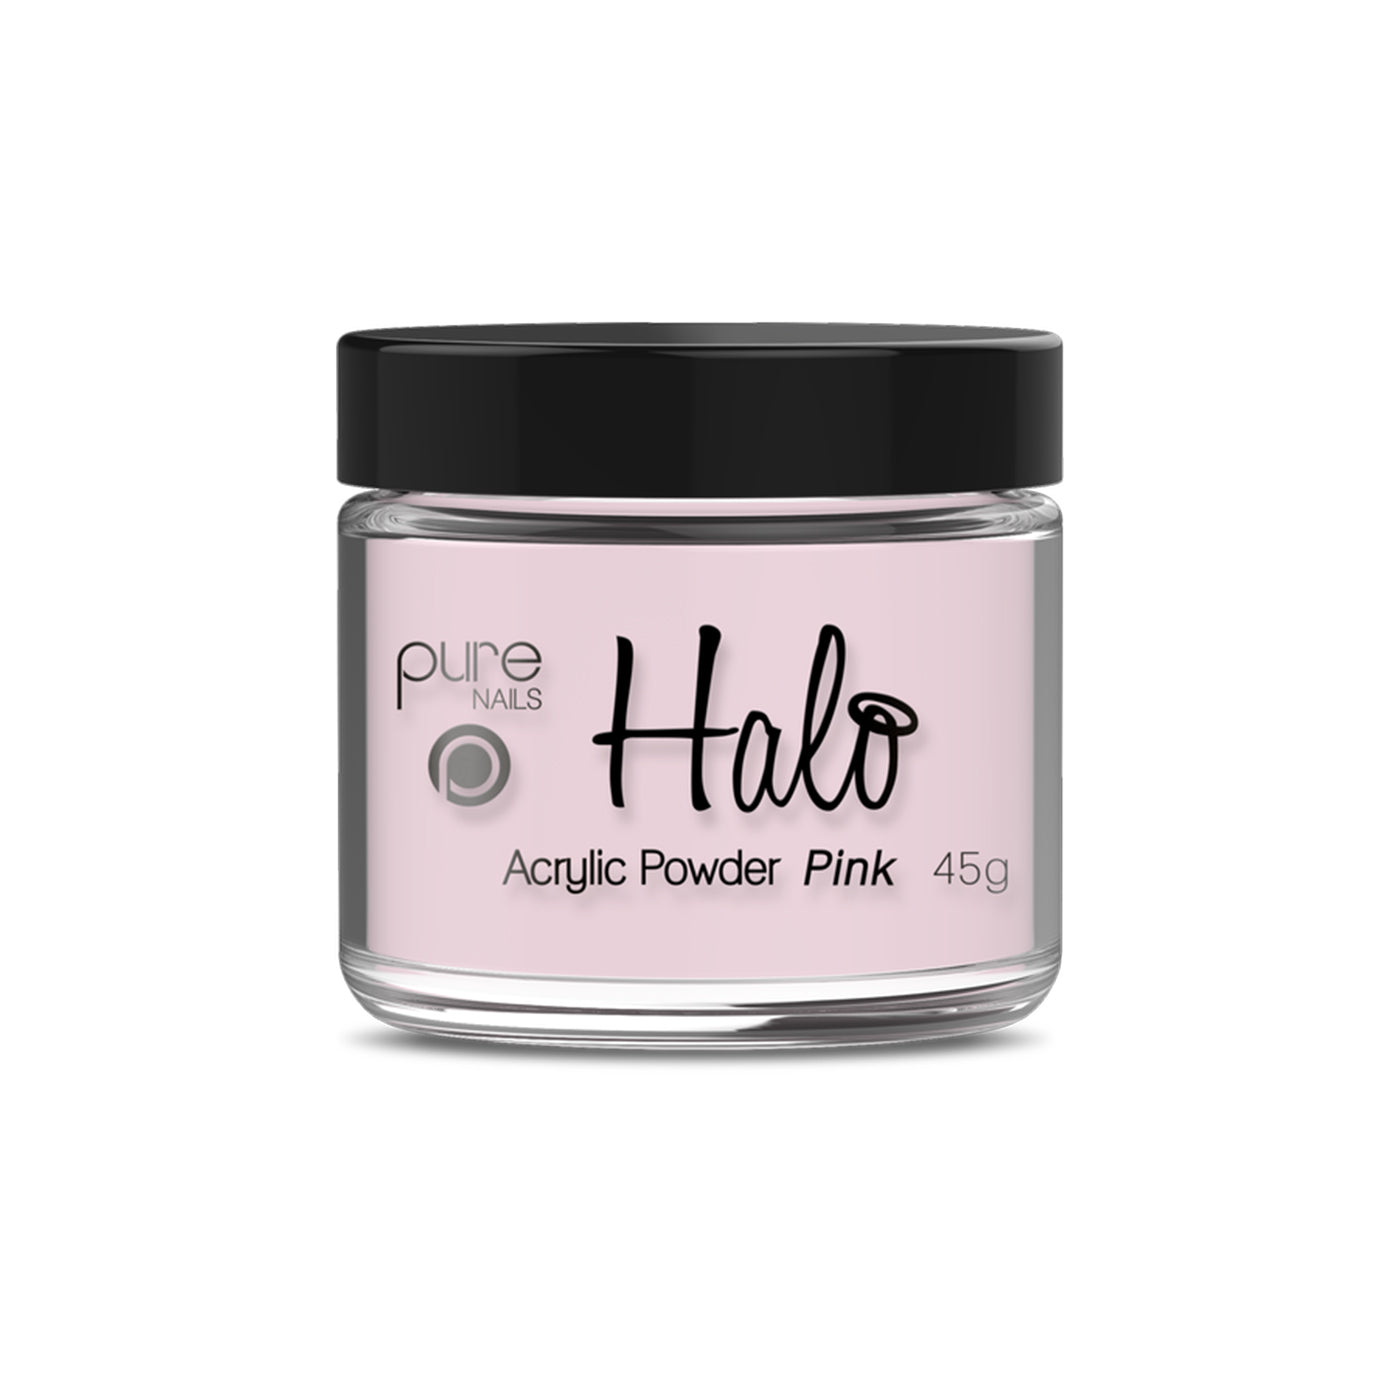 Halo Acrylic Powder - Pink (45g) - Ultimate Hair and Beauty